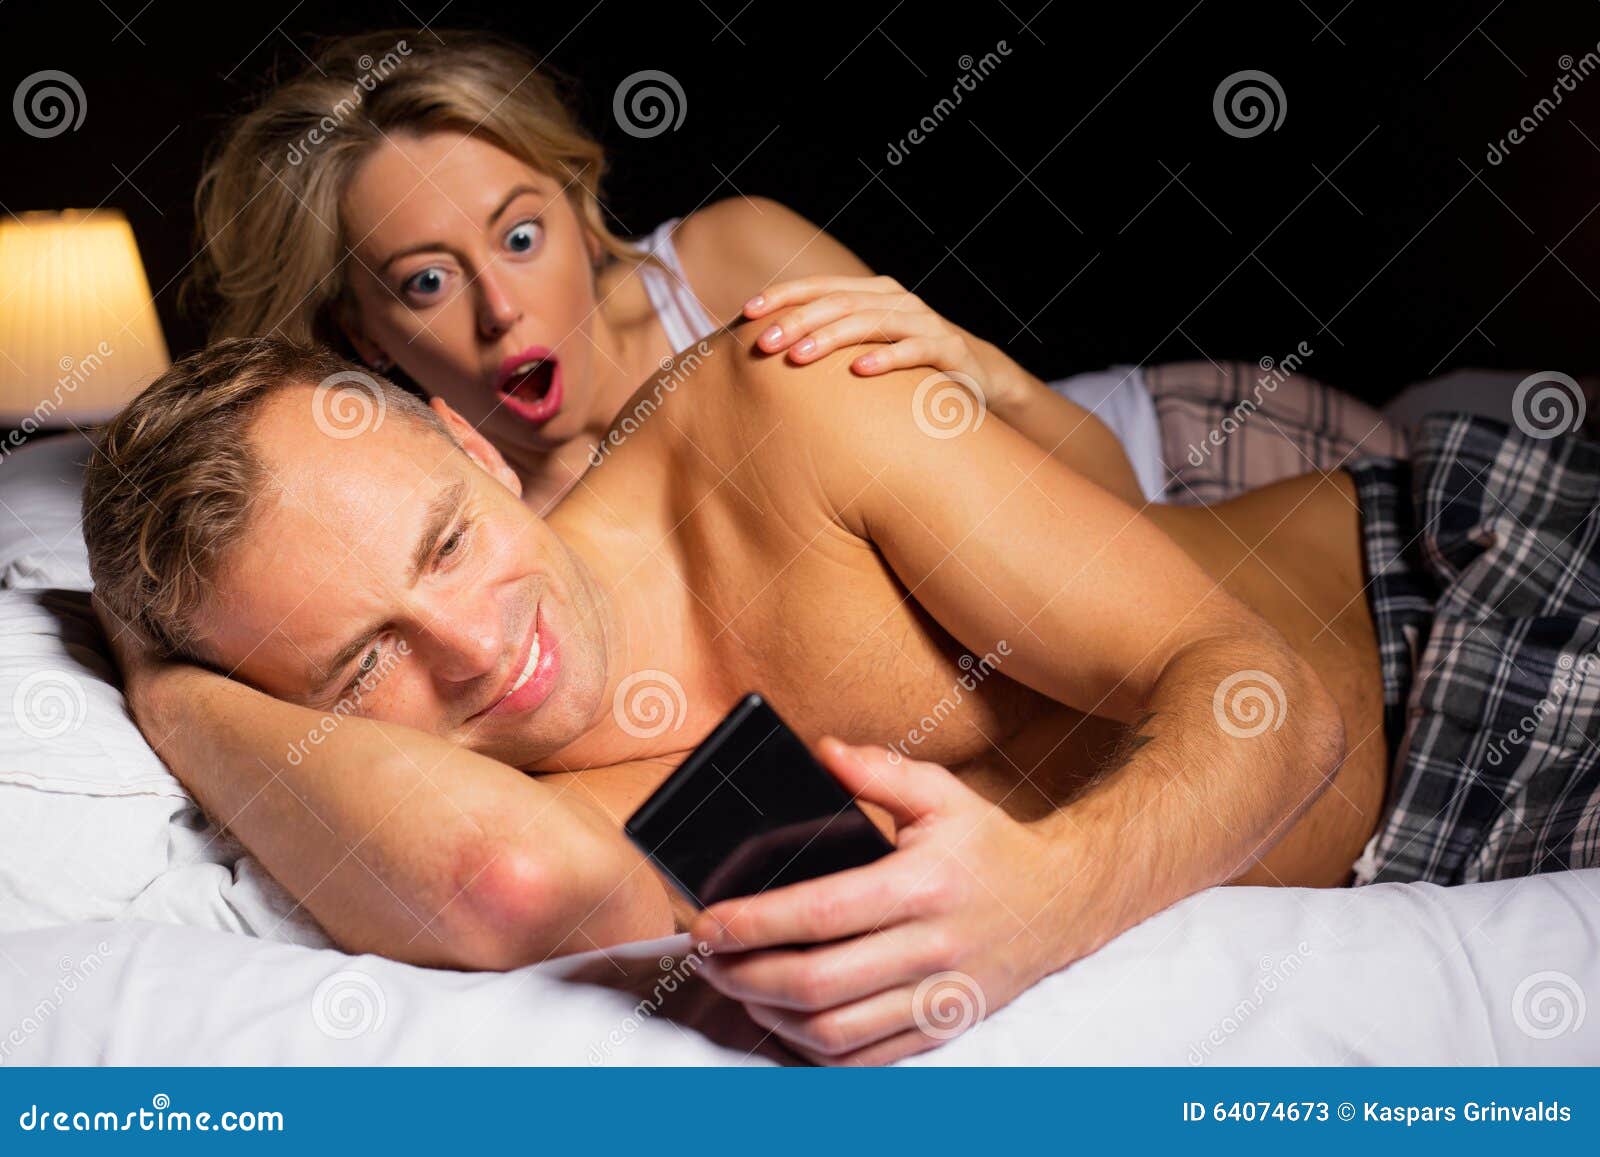 Wife caught cheating in bed